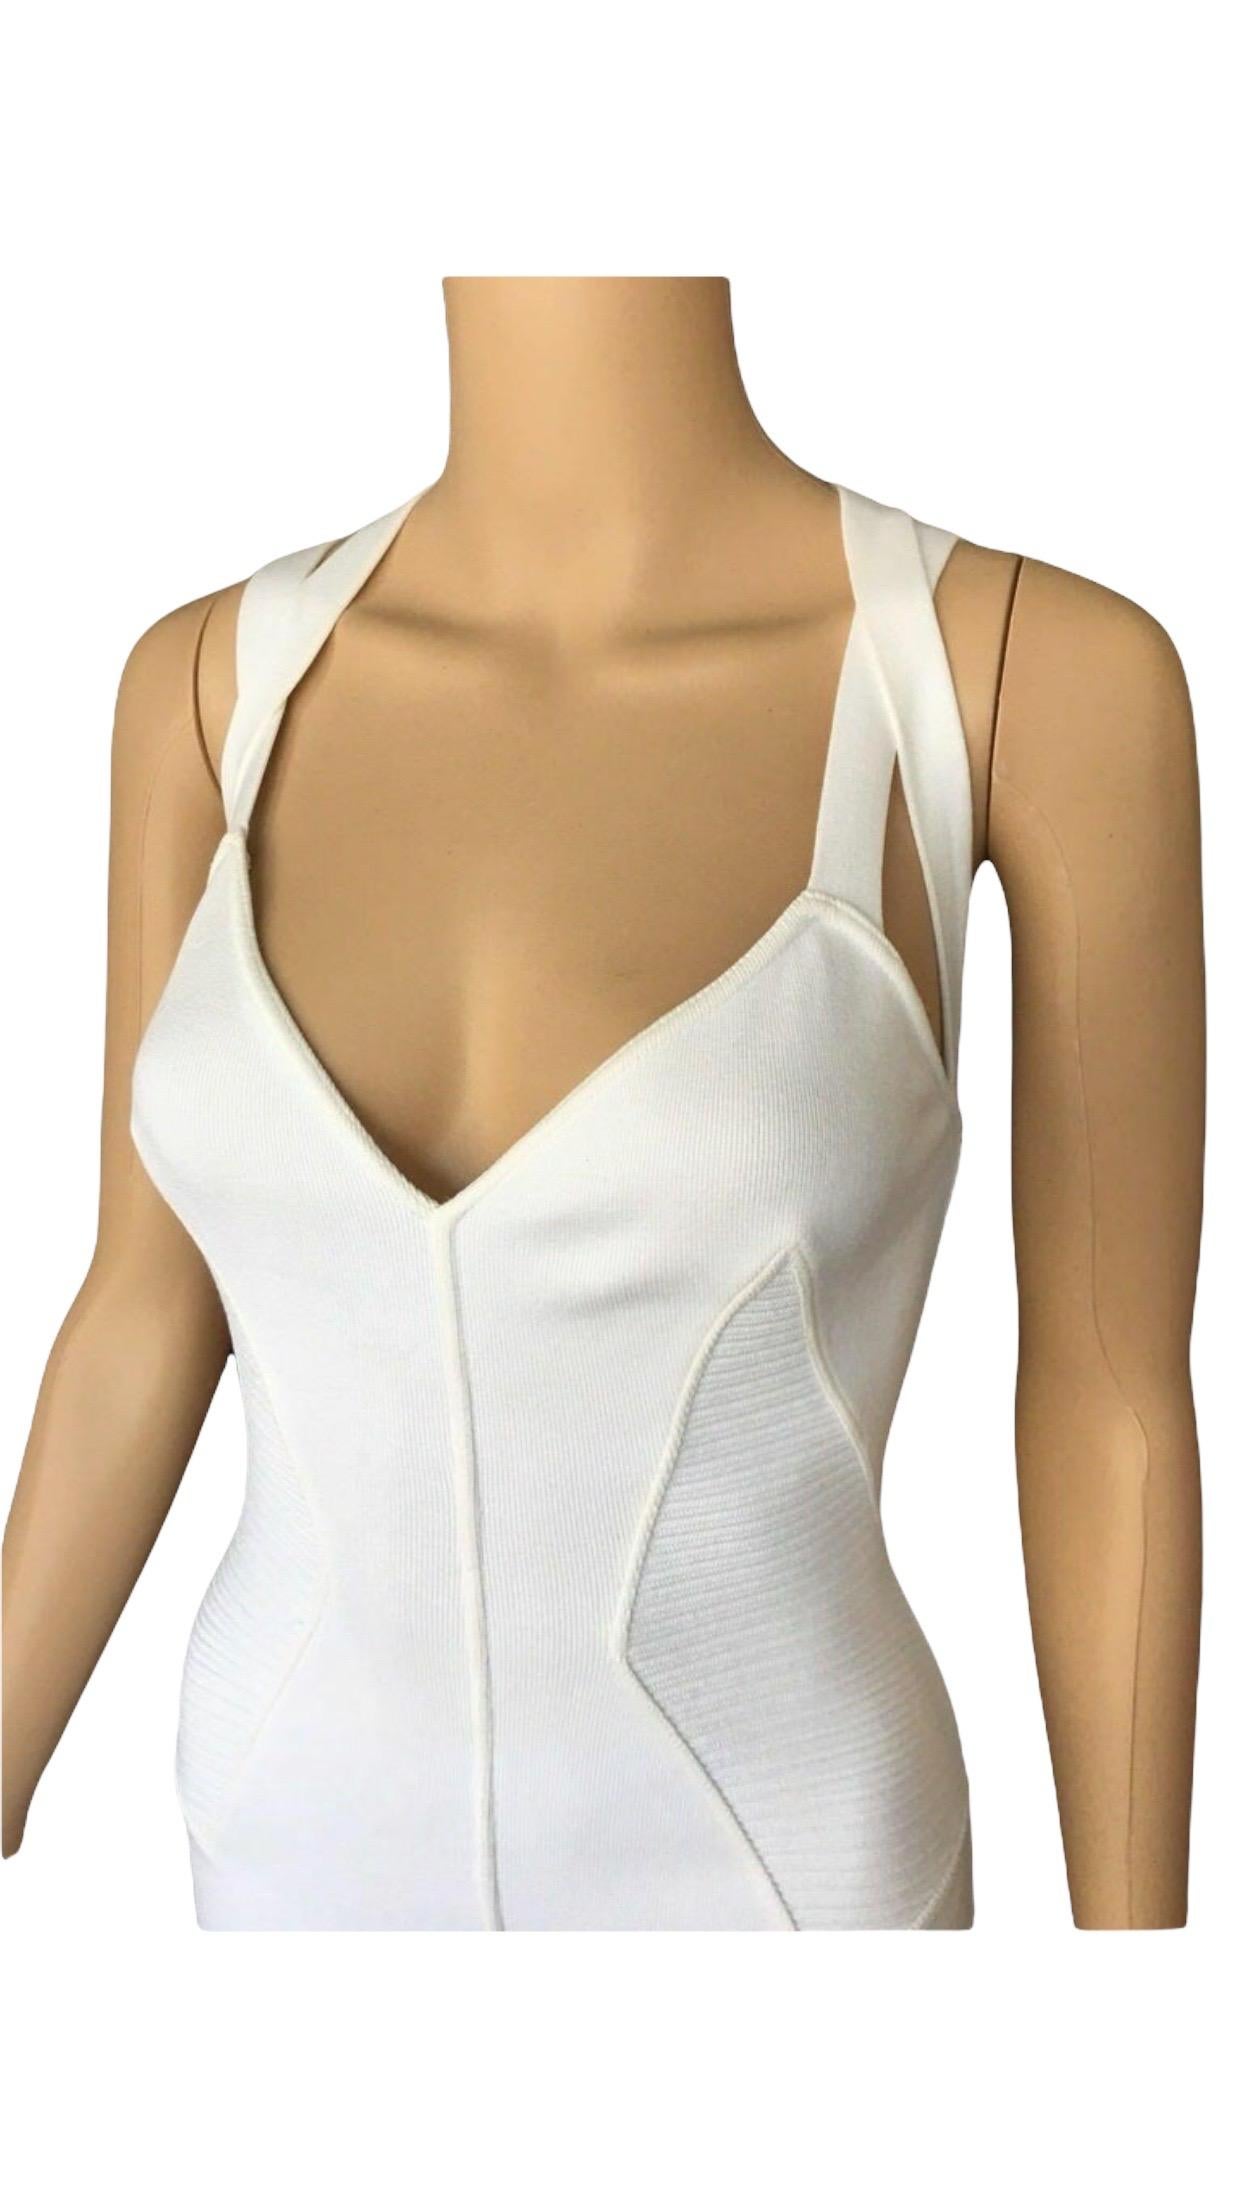 Azzedine Alaia S/S 1990 Vintage Fitted White Dress For Sale 1